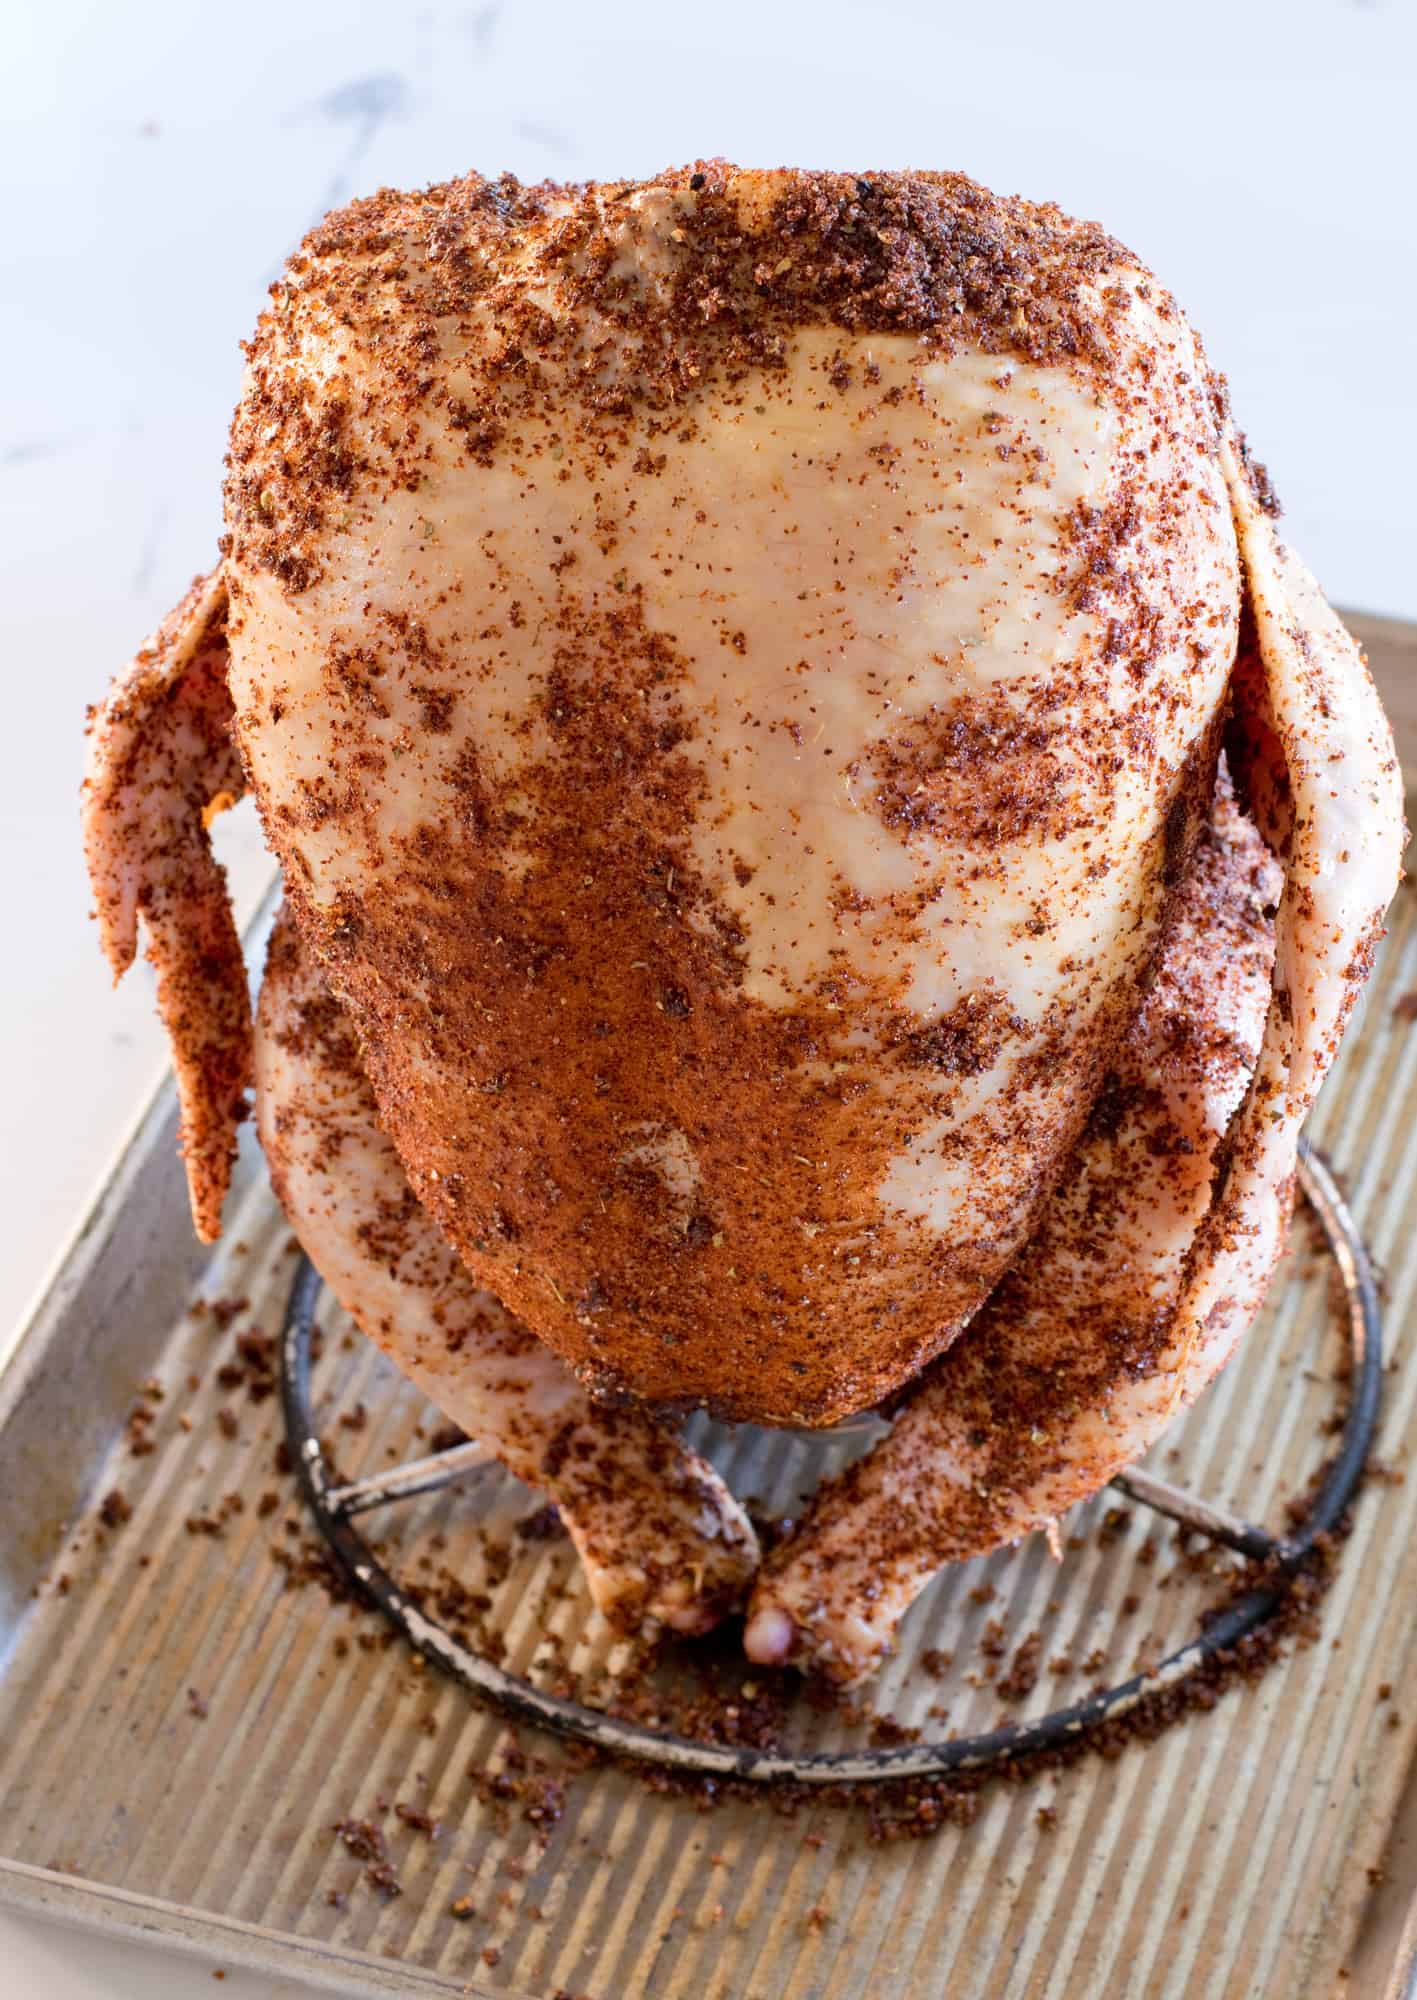 Awesome beer can chicken seasoned and ready to go on the grill